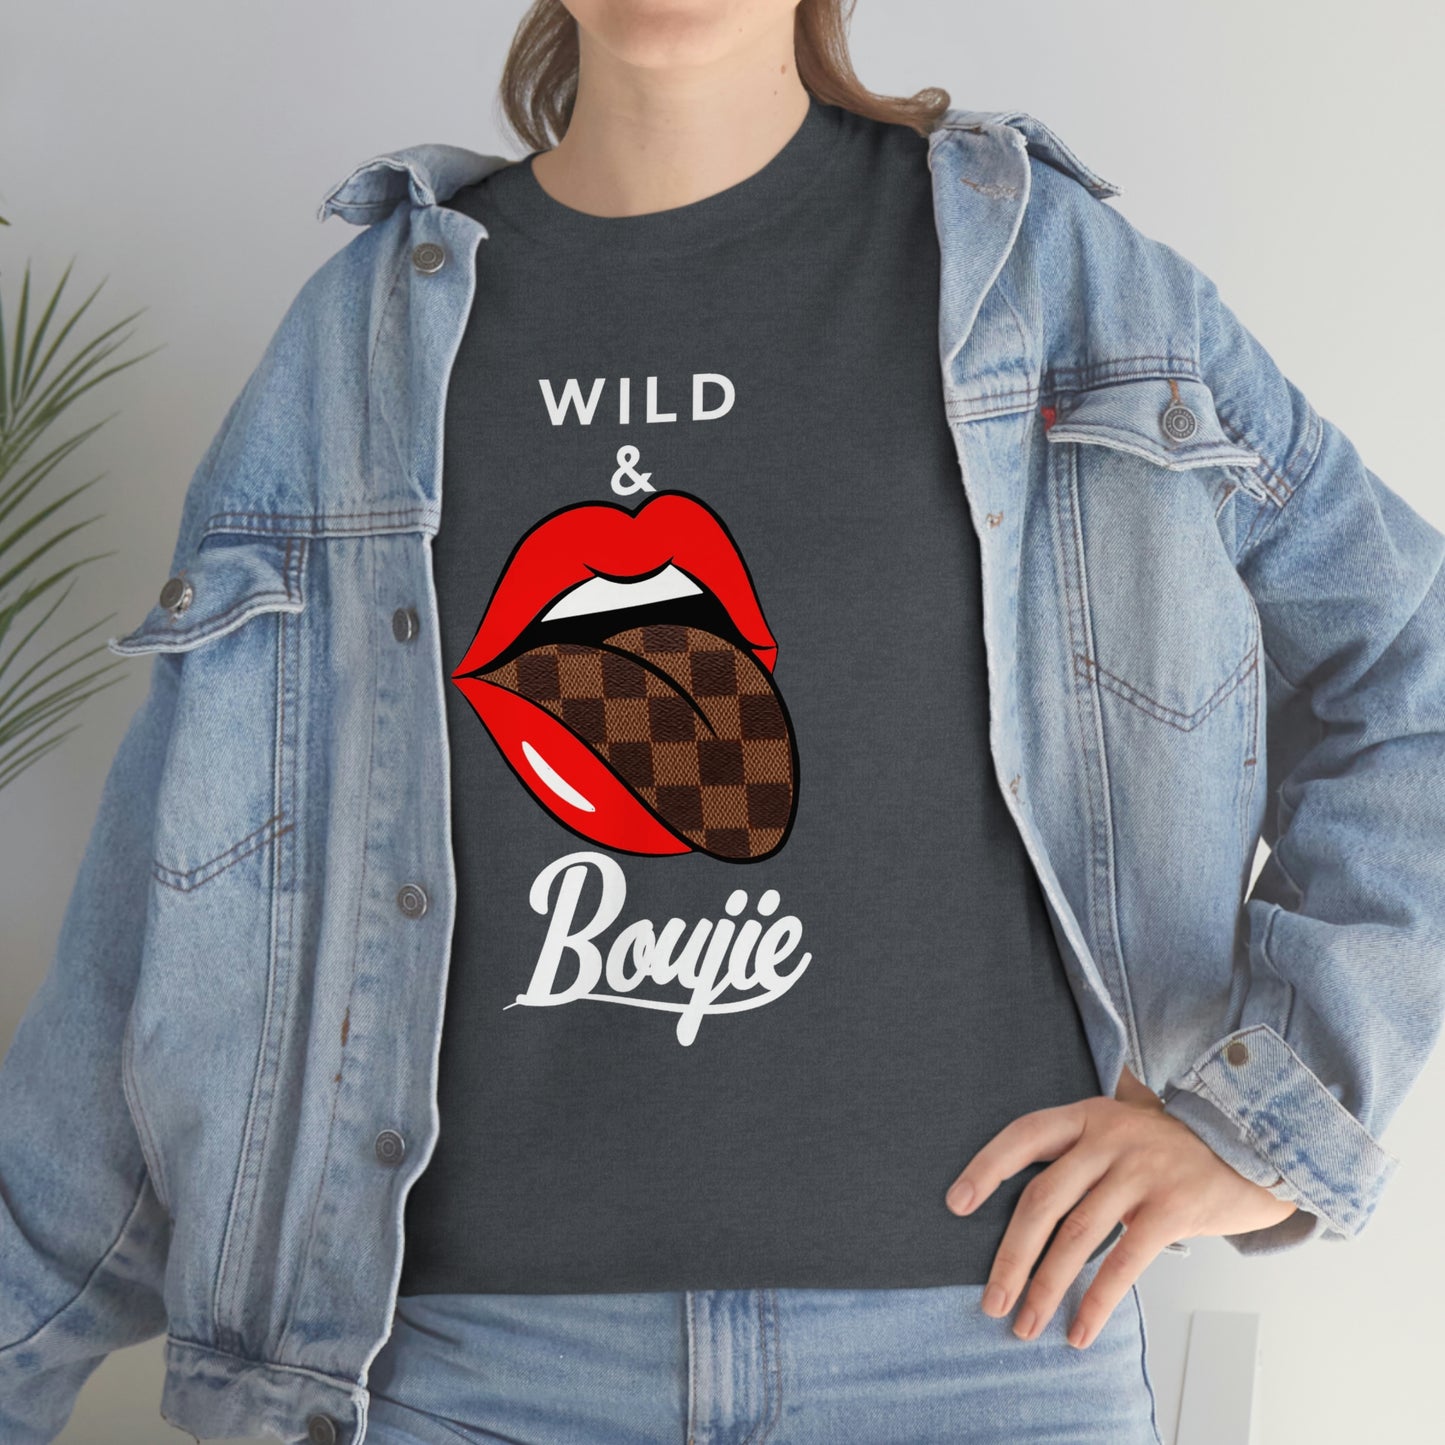 Wild and boujie red lip with white font